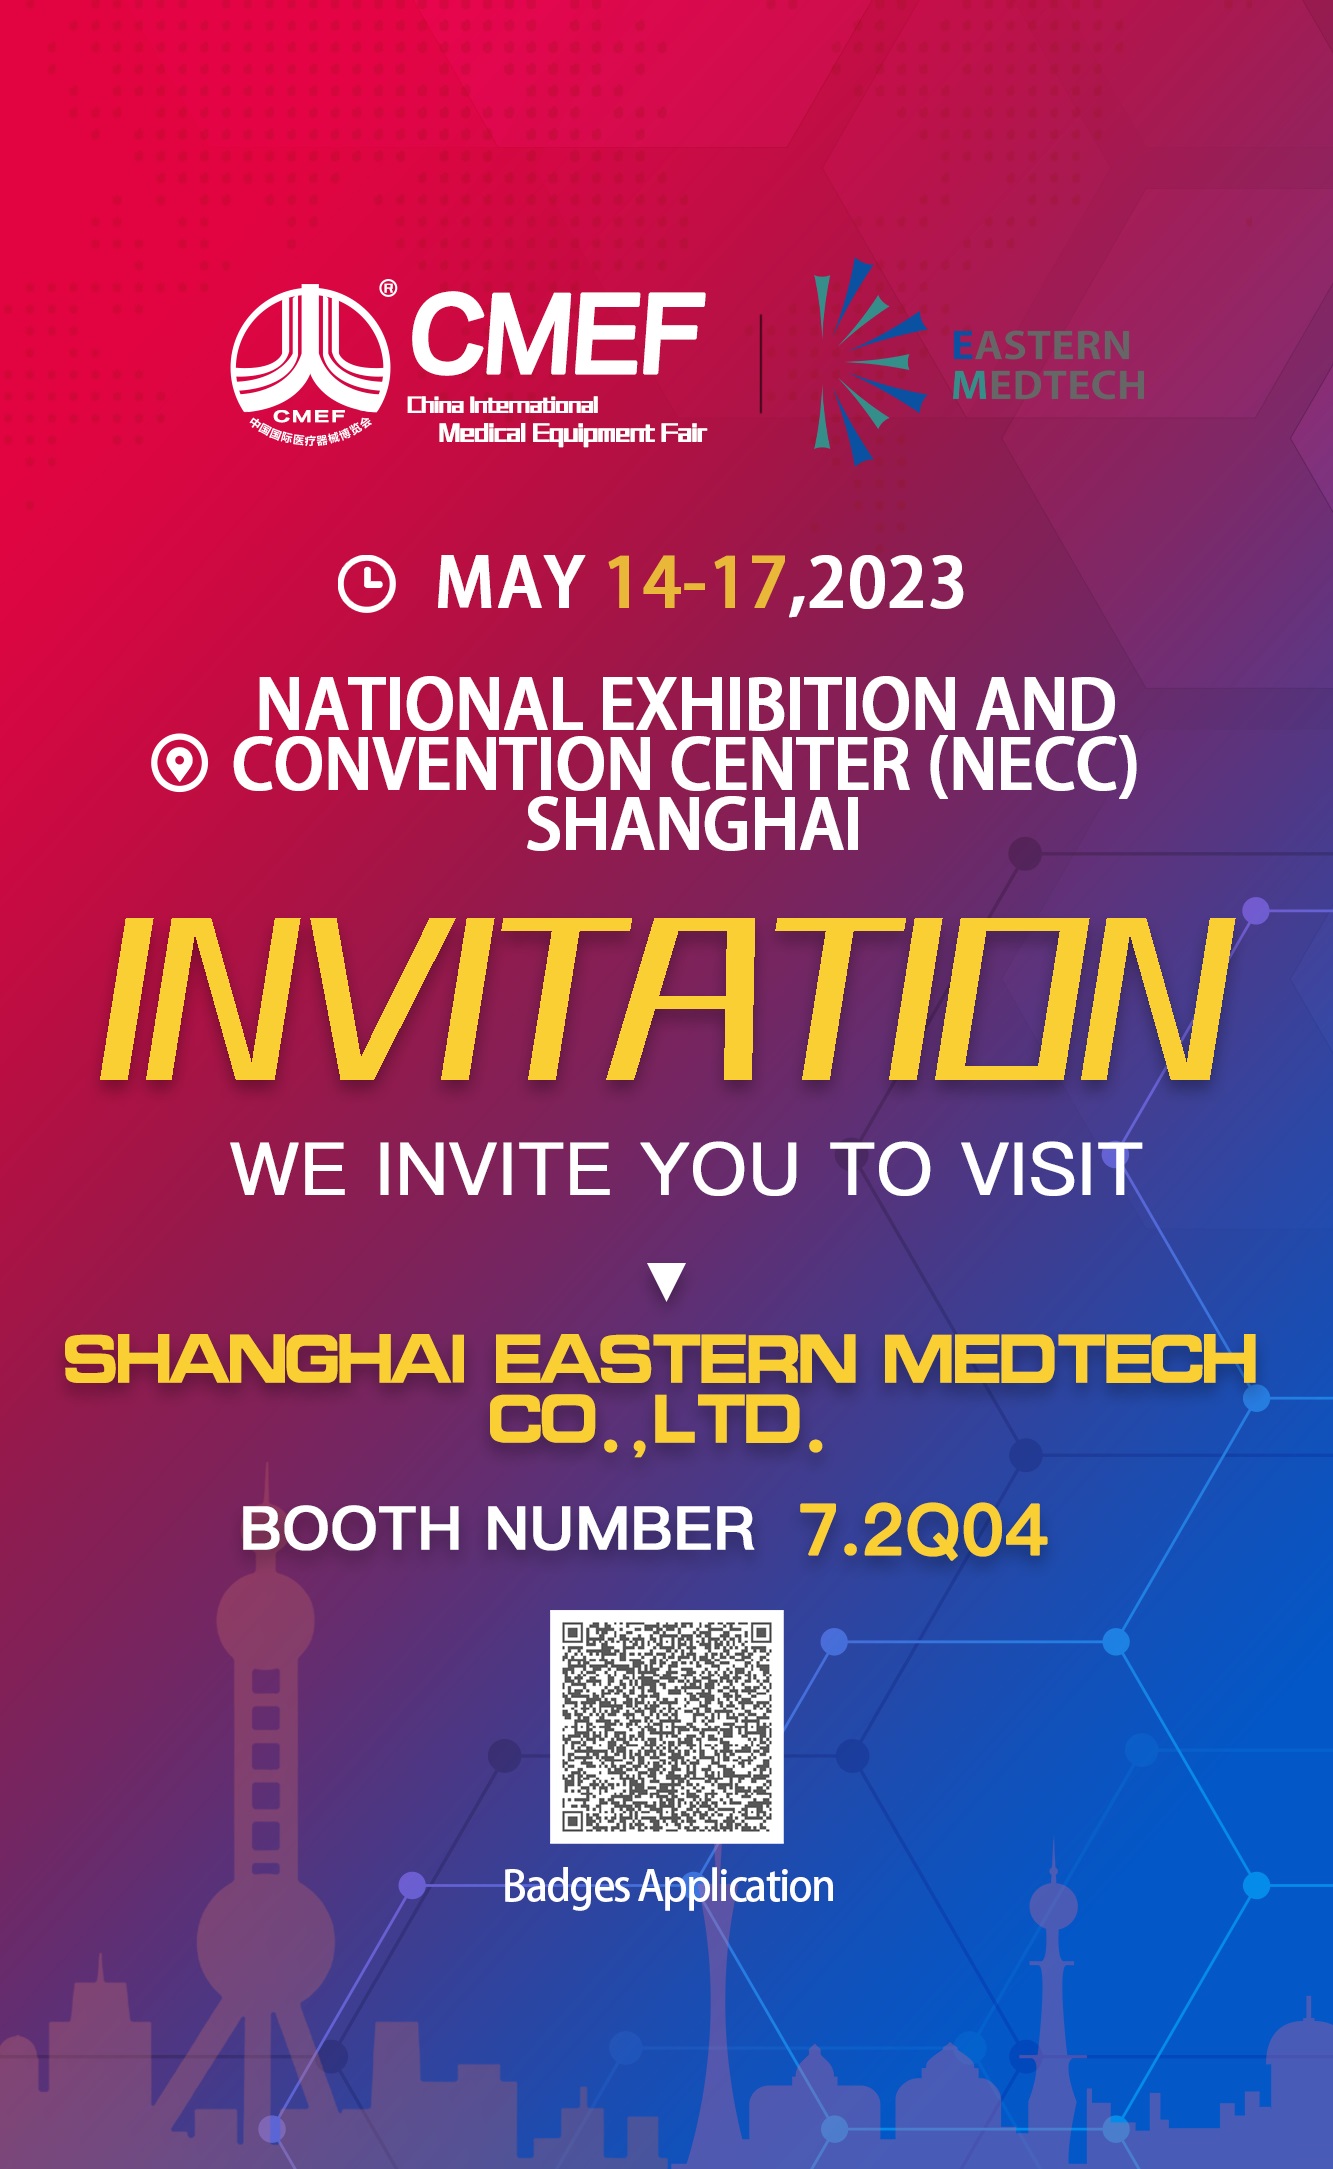 Welcome to visit us at CMEF Shanghai 2023!